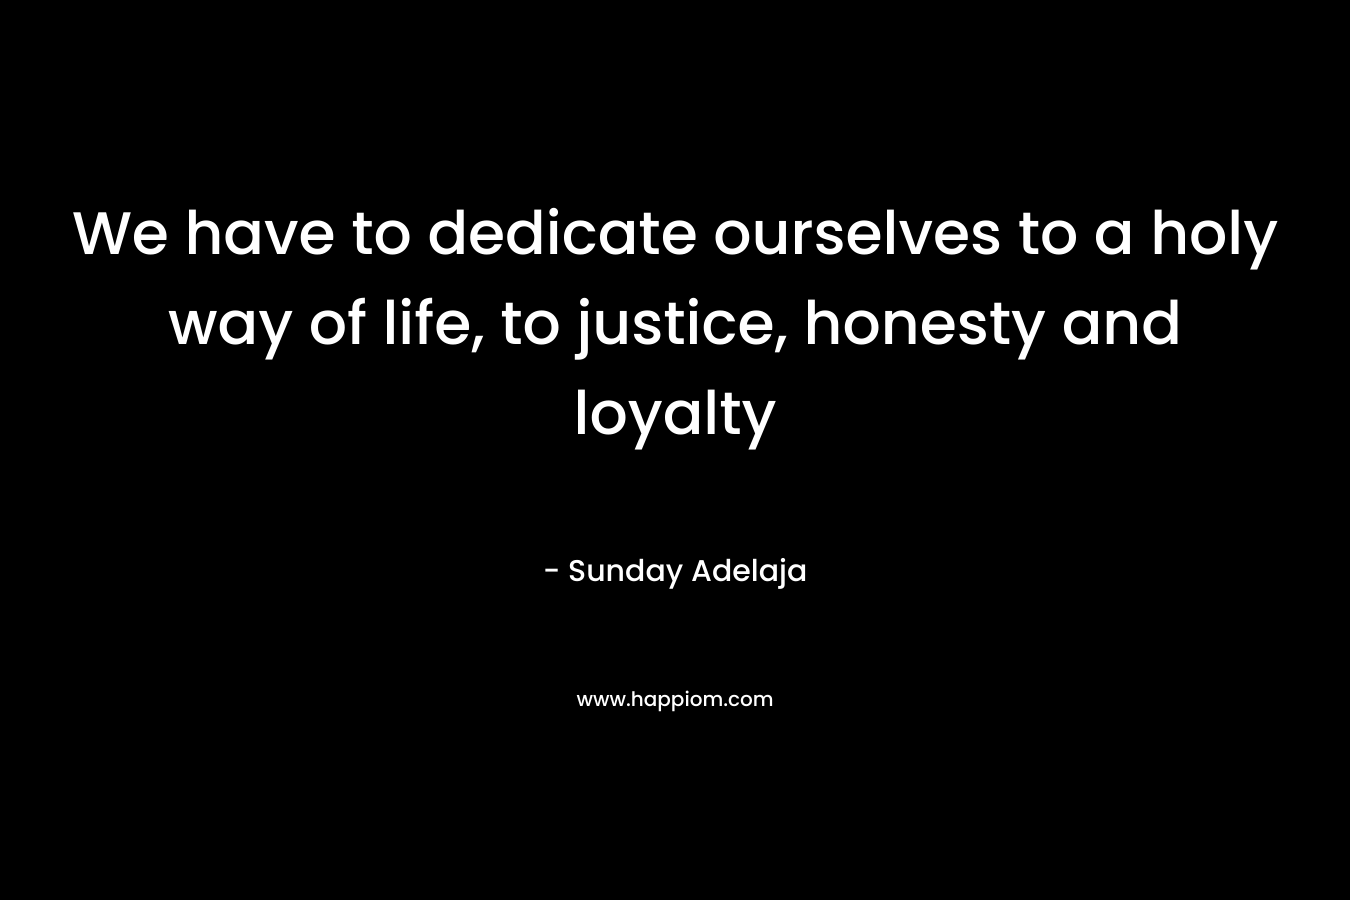 We have to dedicate ourselves to a holy way of life, to justice, honesty and loyalty – Sunday Adelaja